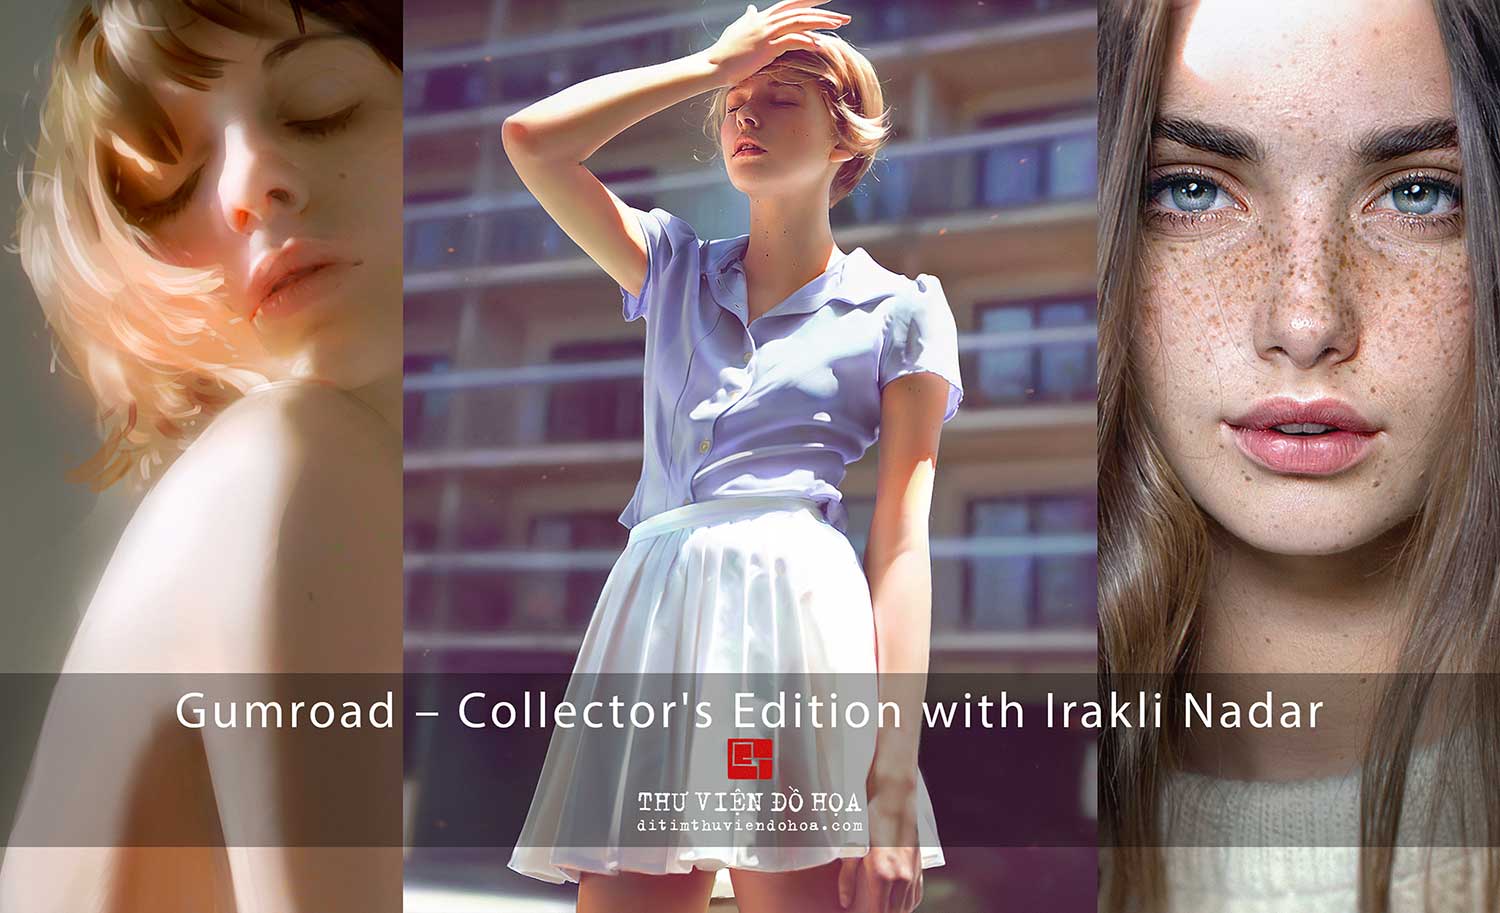 [ Tutorials ] Gumroad – Collector's Edition with Irakli Nadar | Vẽ bằng Photoshop